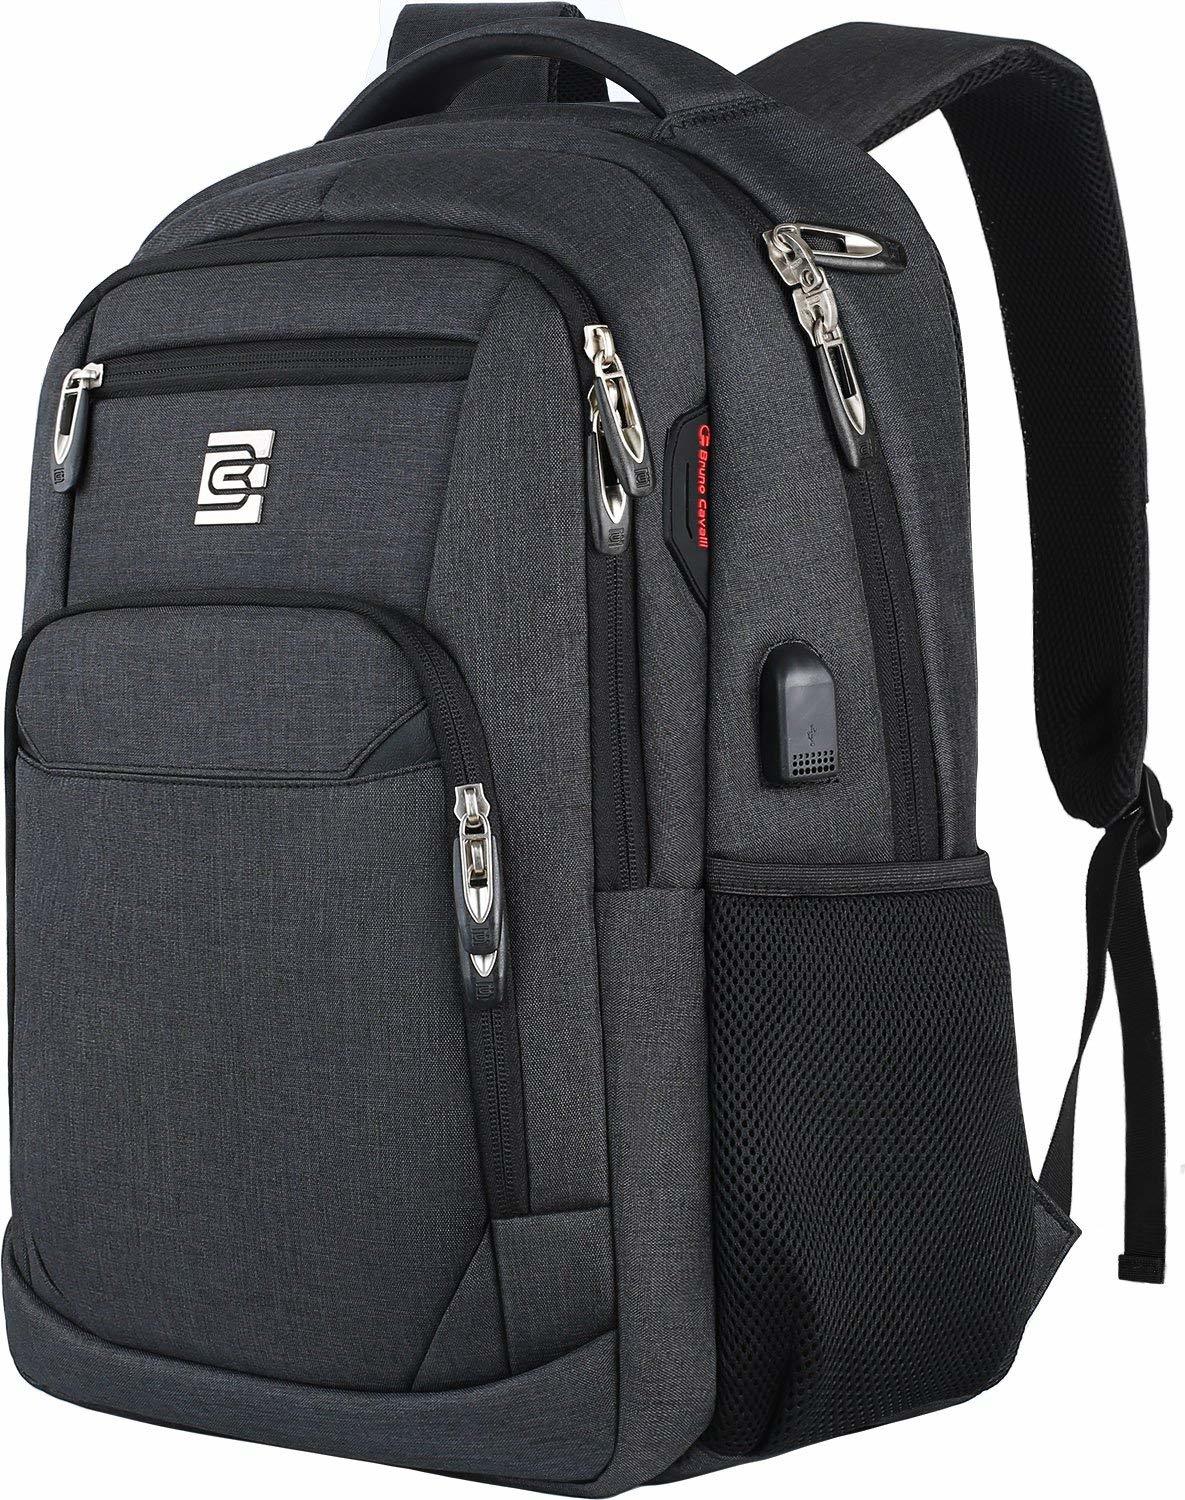 10 Backpack with a Laptop Compartment Suitable for Traveling 5